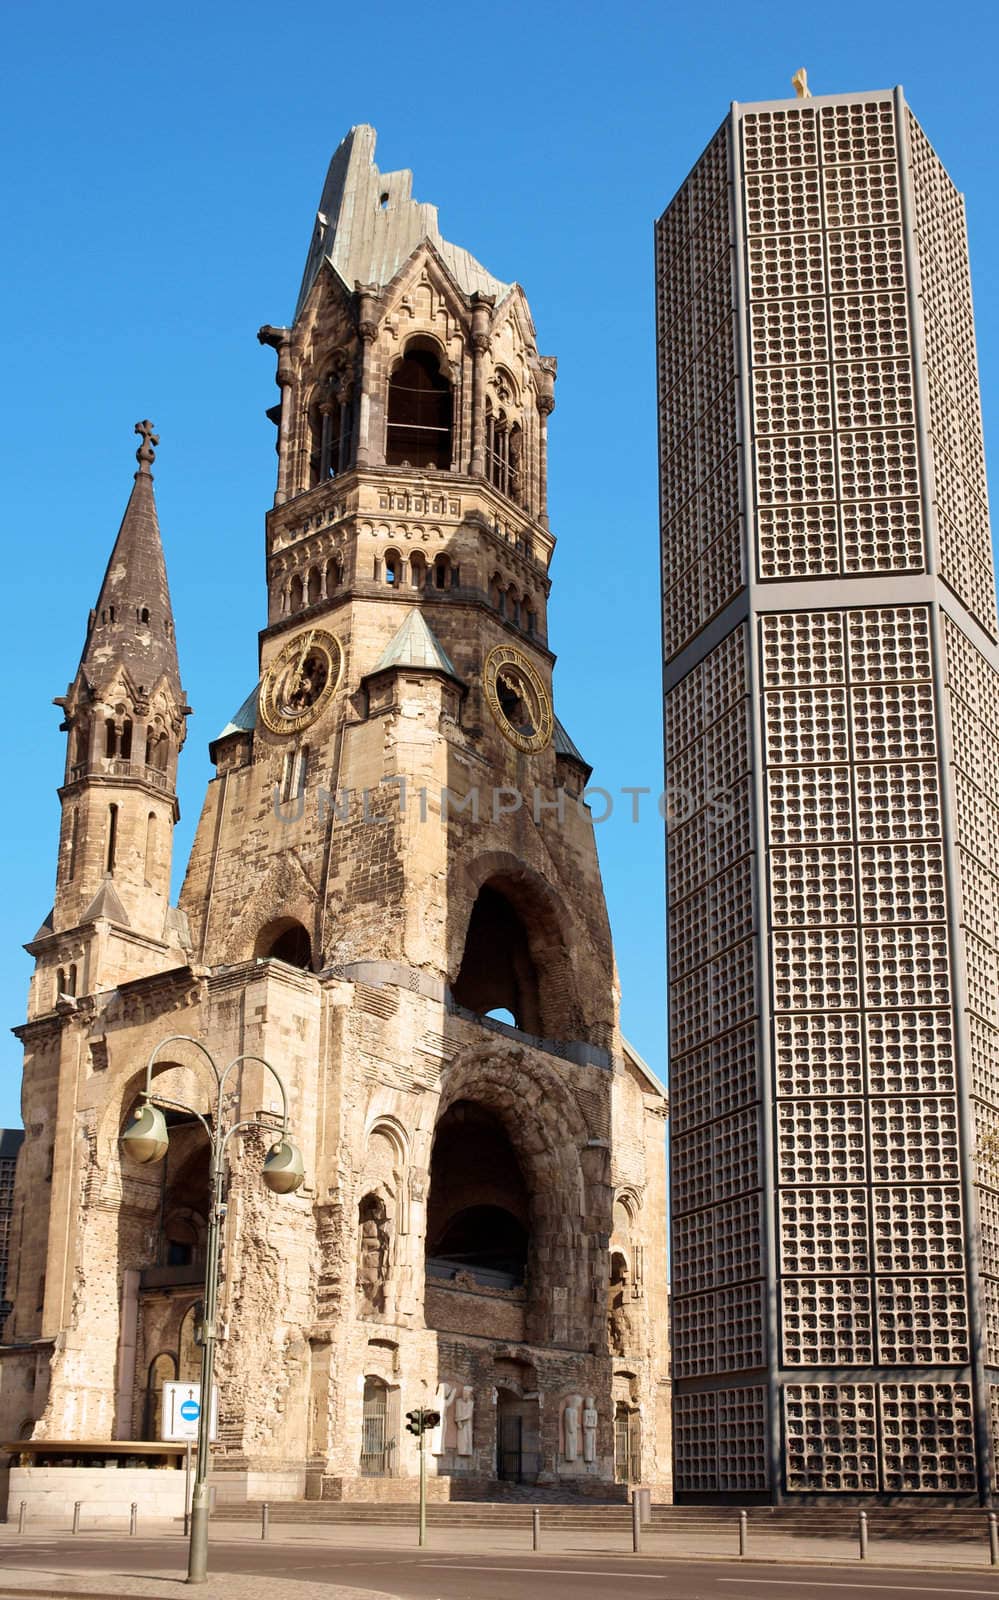 Kaiser Wilhelm Memorial Church in Berlin. Historical church hit and damaged by allied air forces during the second world war and never restored. On the right the bell tower of the modern new church.